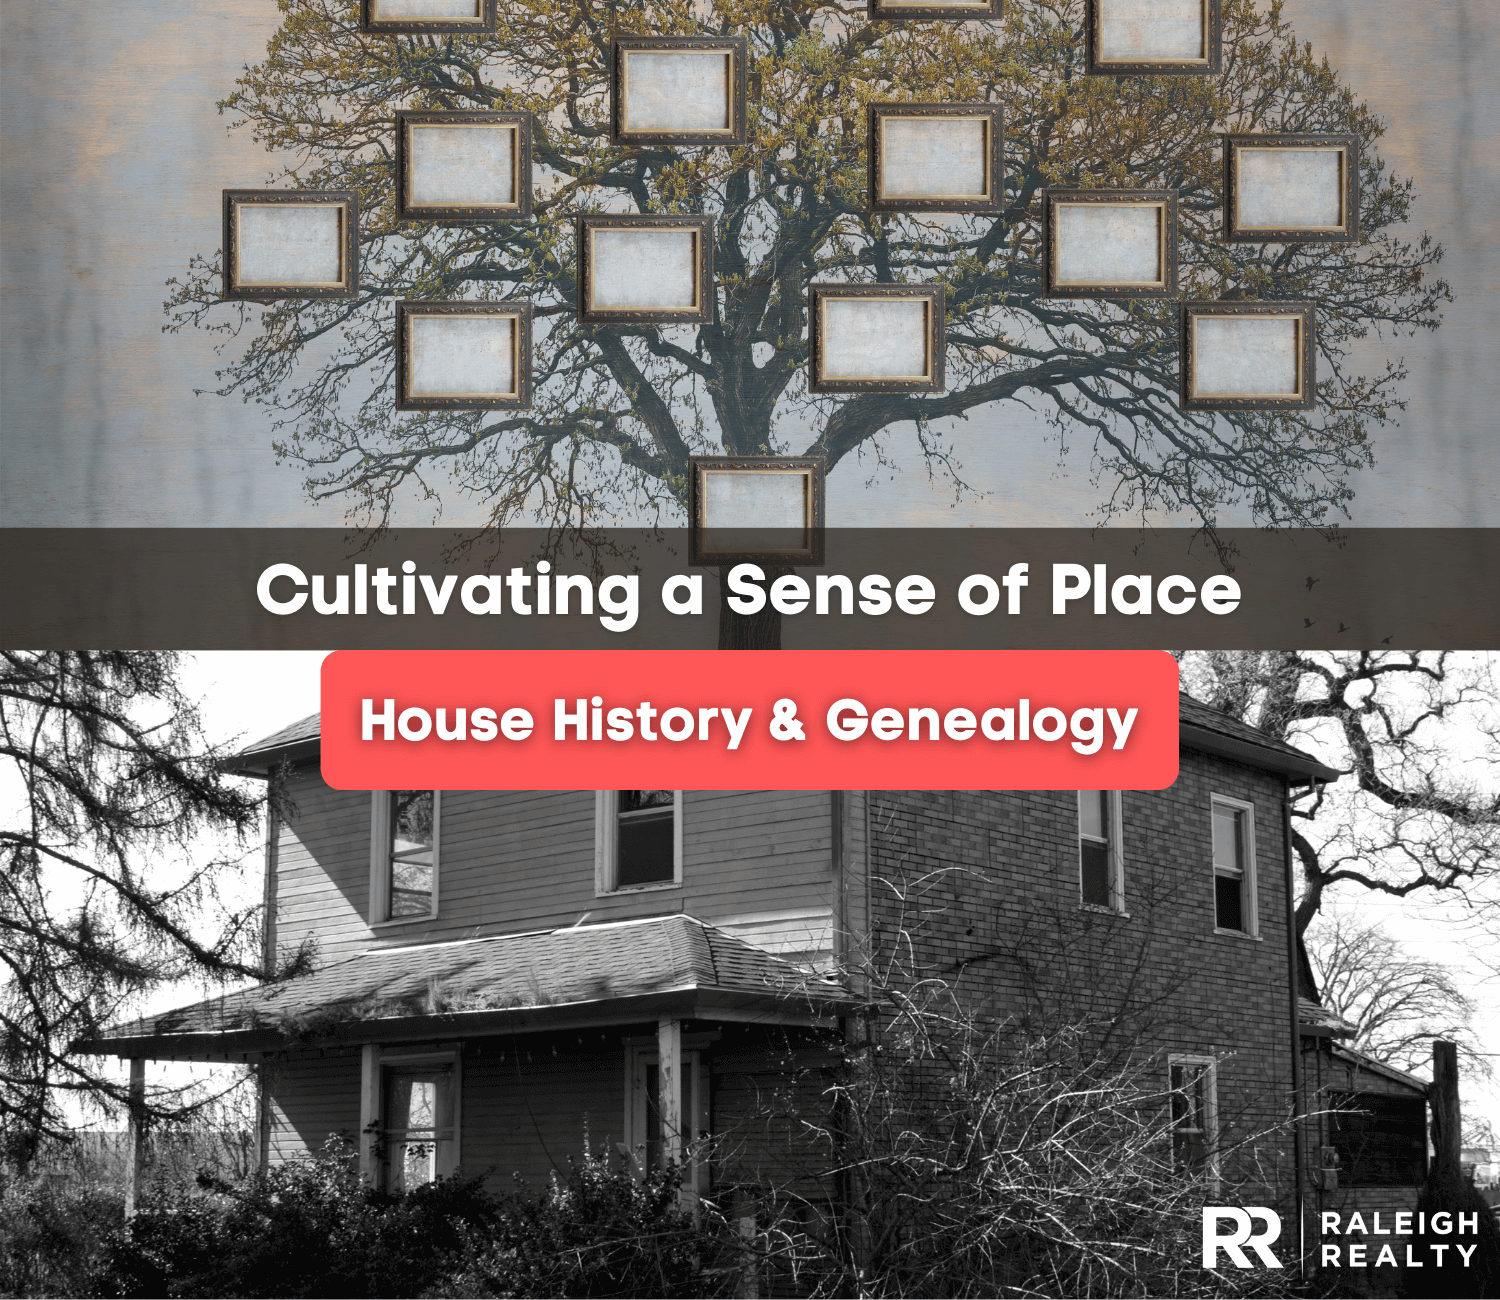 House history & genealogy: cultivating a sense of place through history, neighborhood and home research